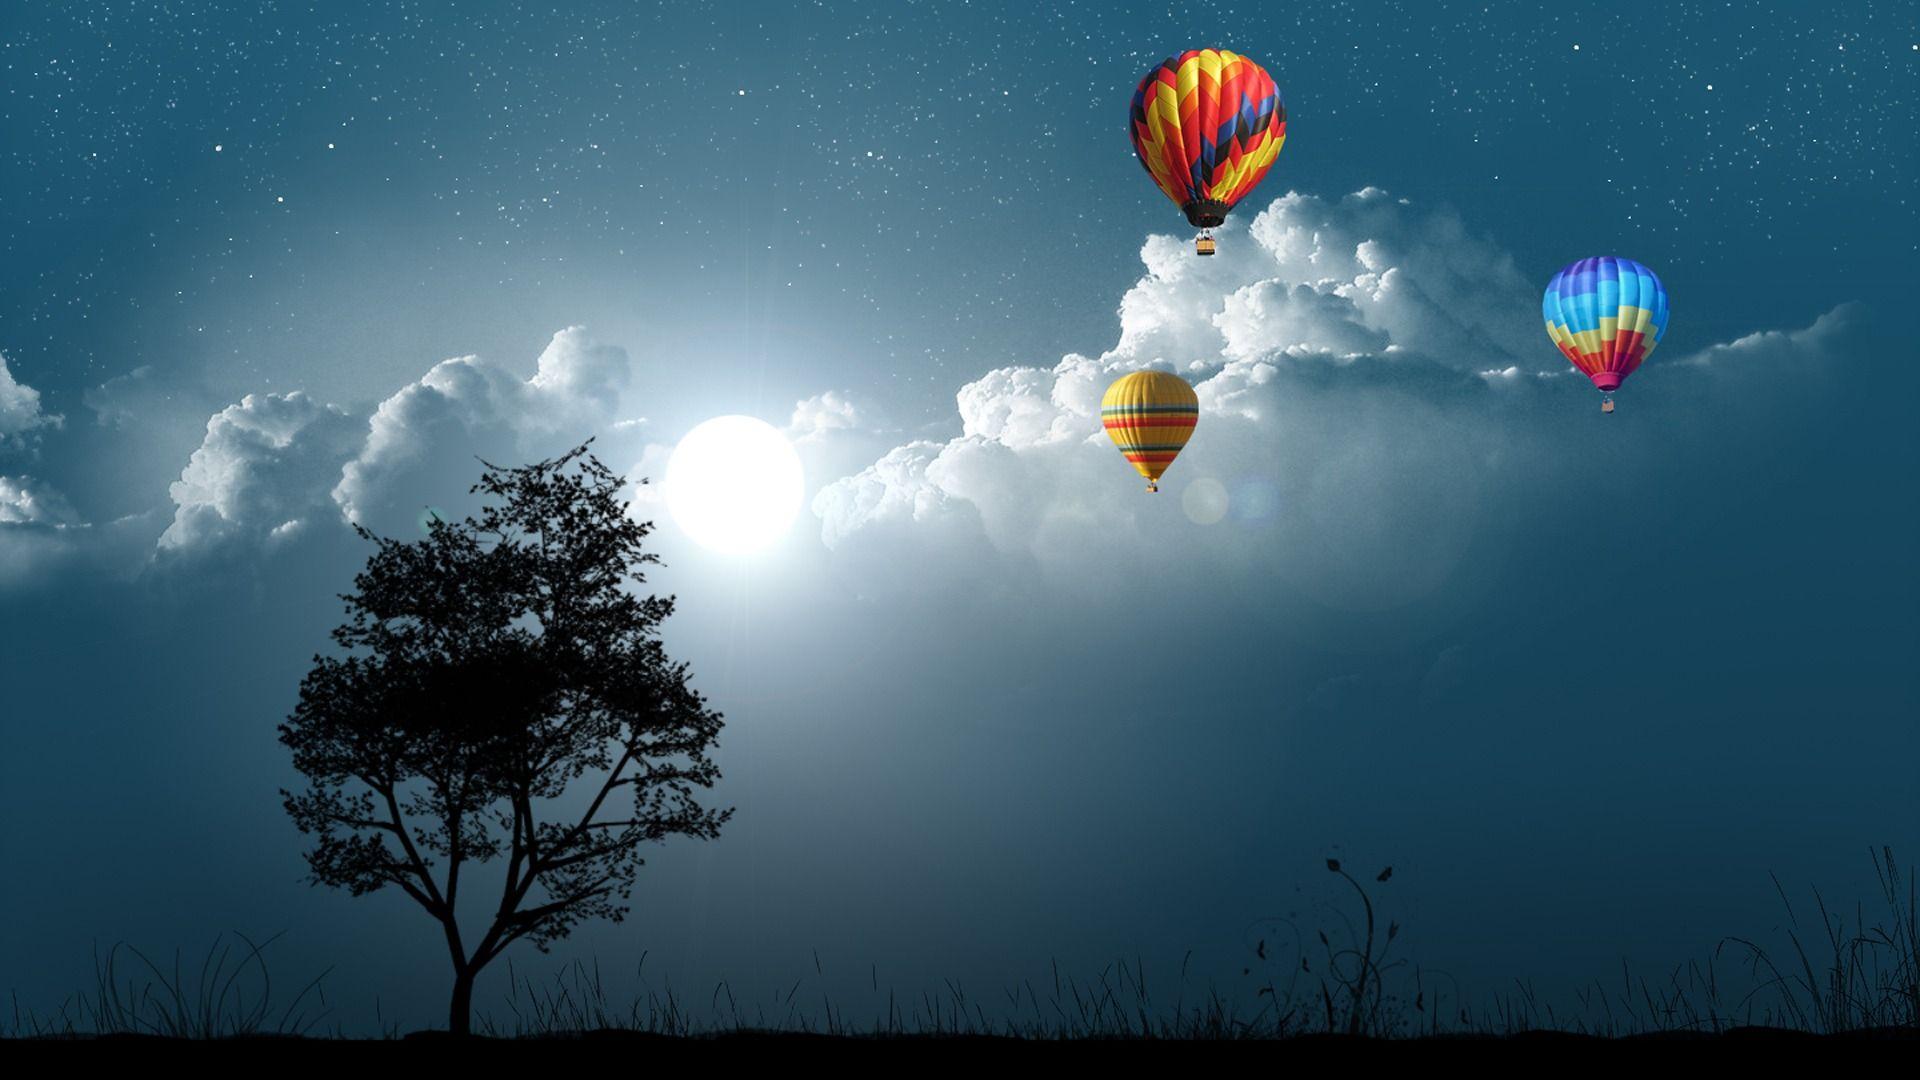 Balloon wallpaper for free download about (25) wallpaper